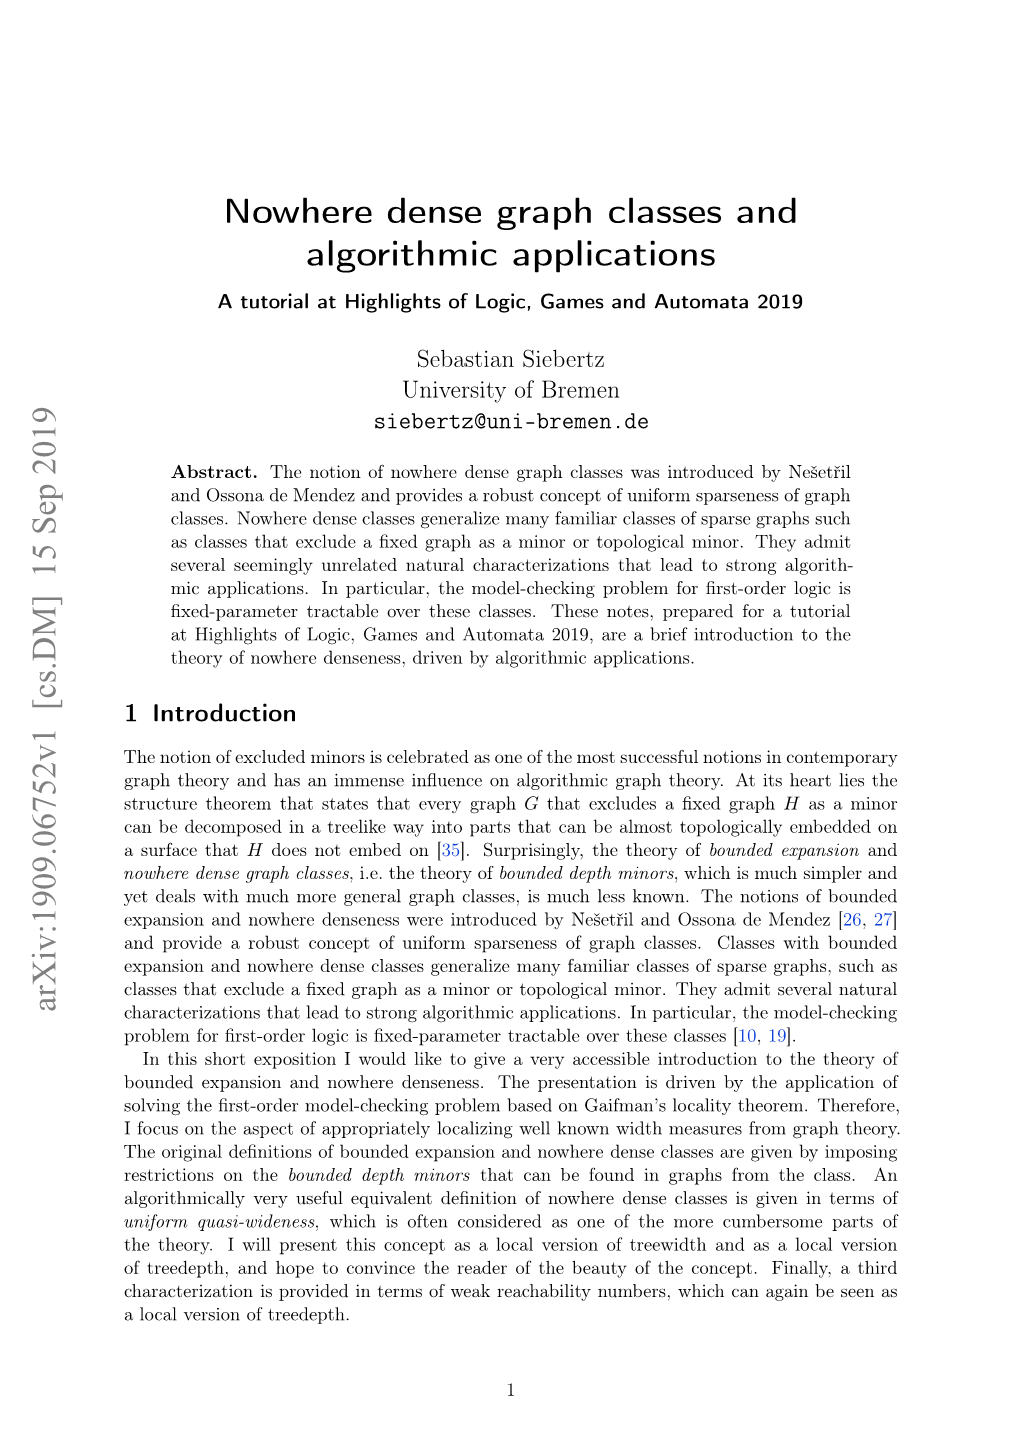 Nowhere Dense Graph Classes and Algorithmic Applications. a Tutorial